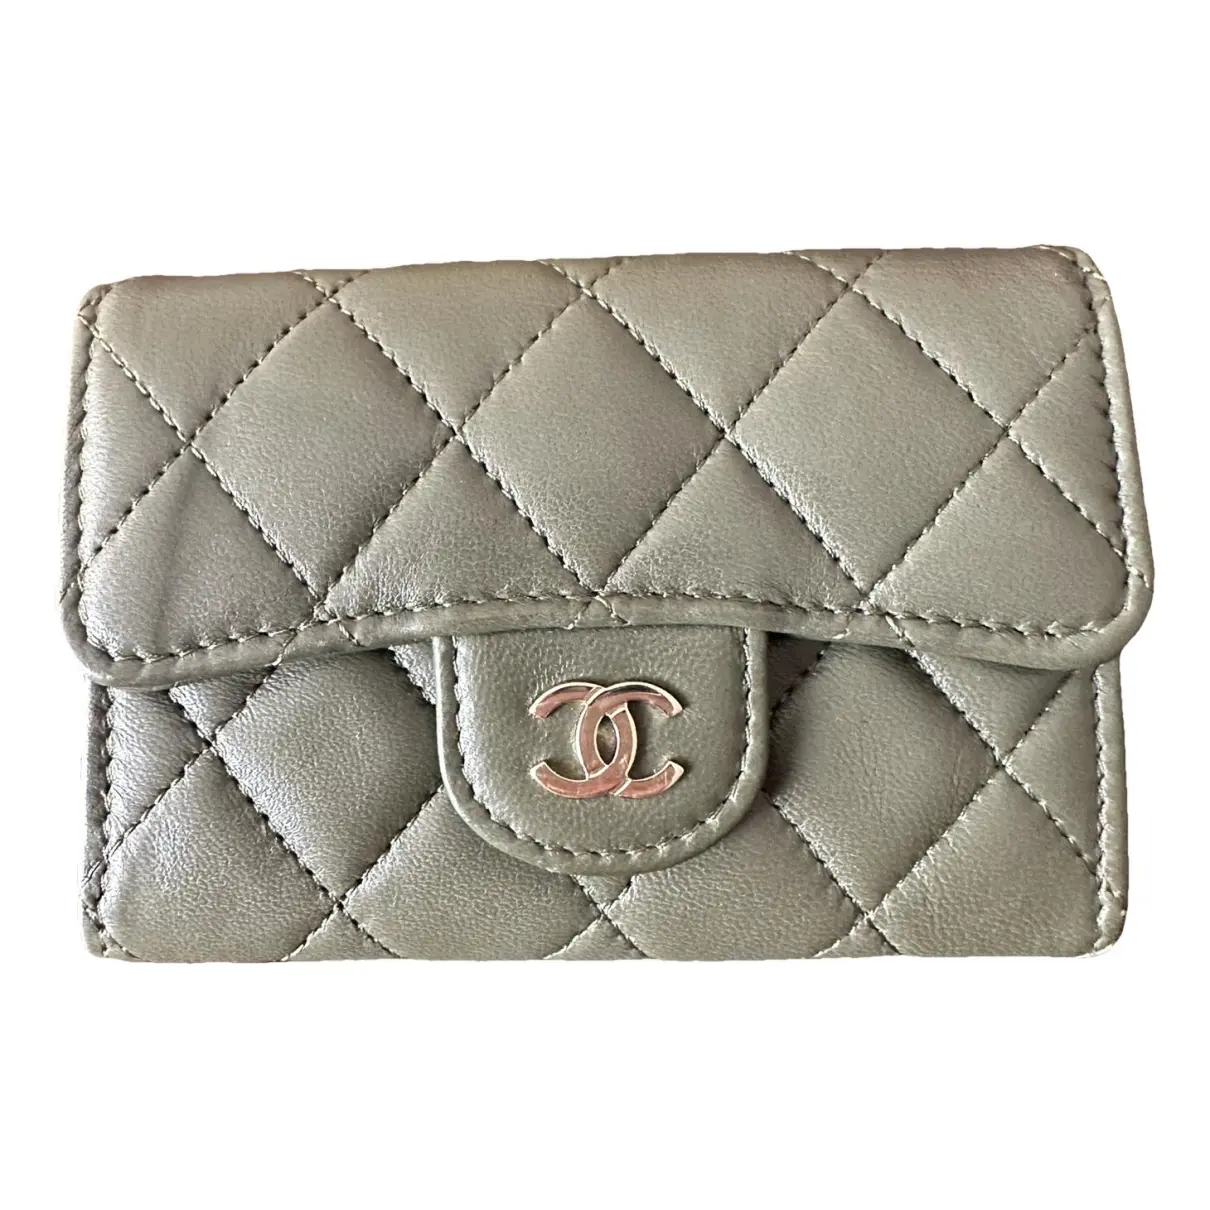 Review Compare chanel card holder classic & XL, Gallery posted by Tiny  corner